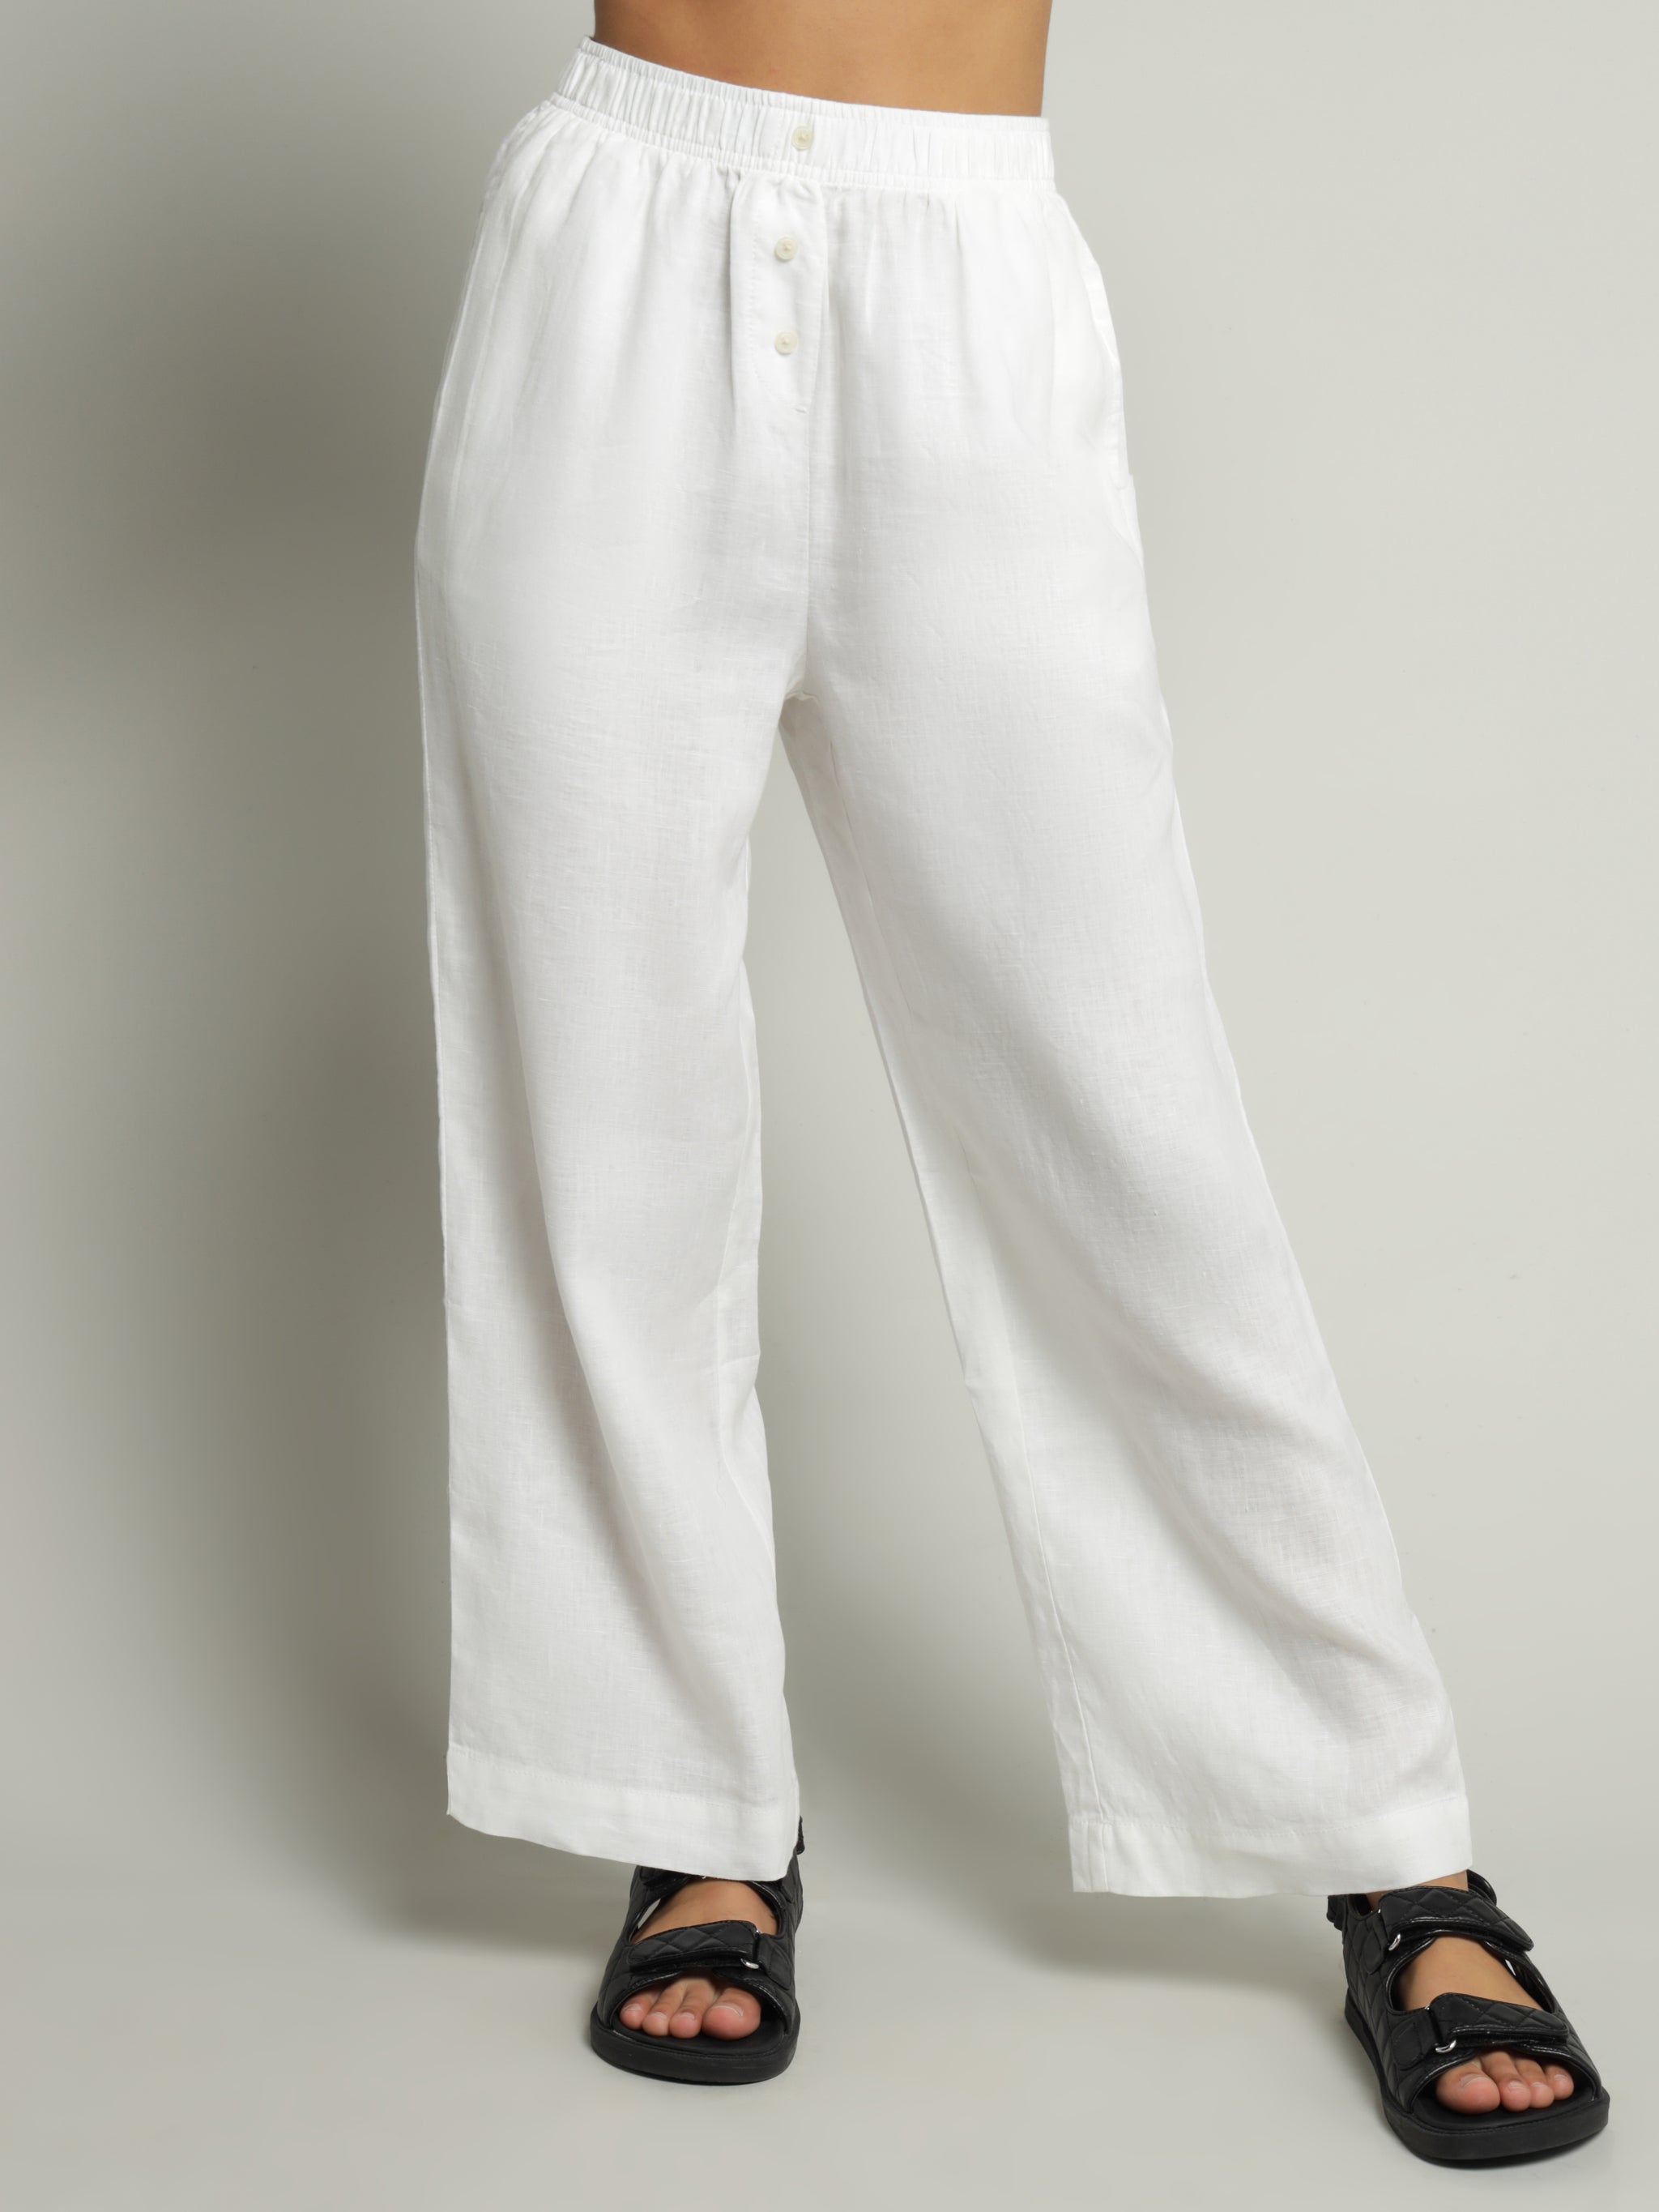 Nude Lounge Linen Pants in White - Glue Store